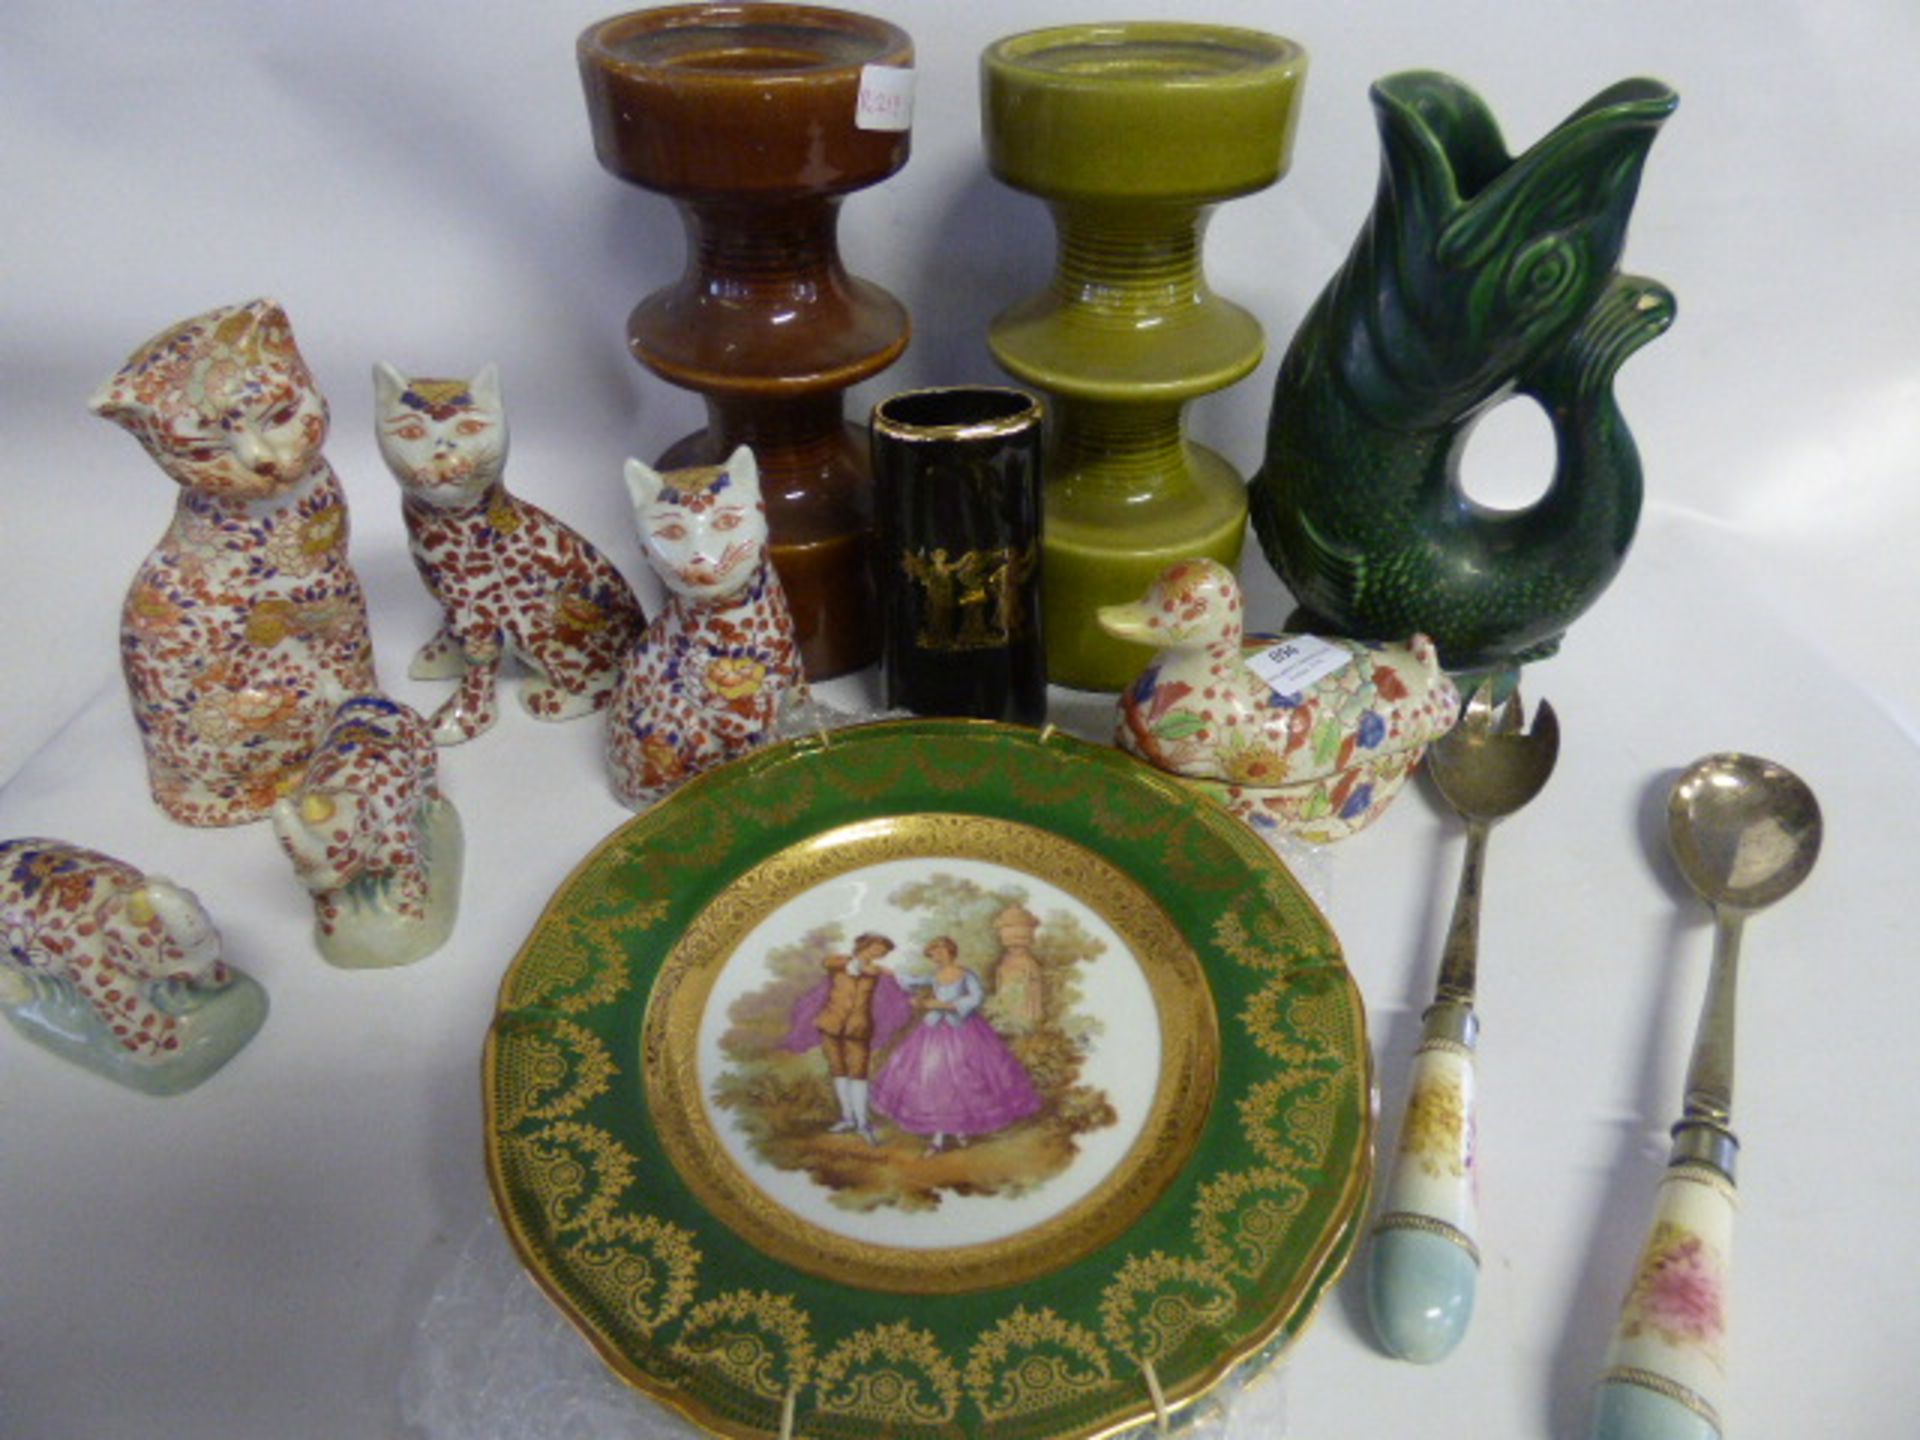 Pair of Ceramic Candlesticks, Reproduction Cats, Plates and Salad Servers